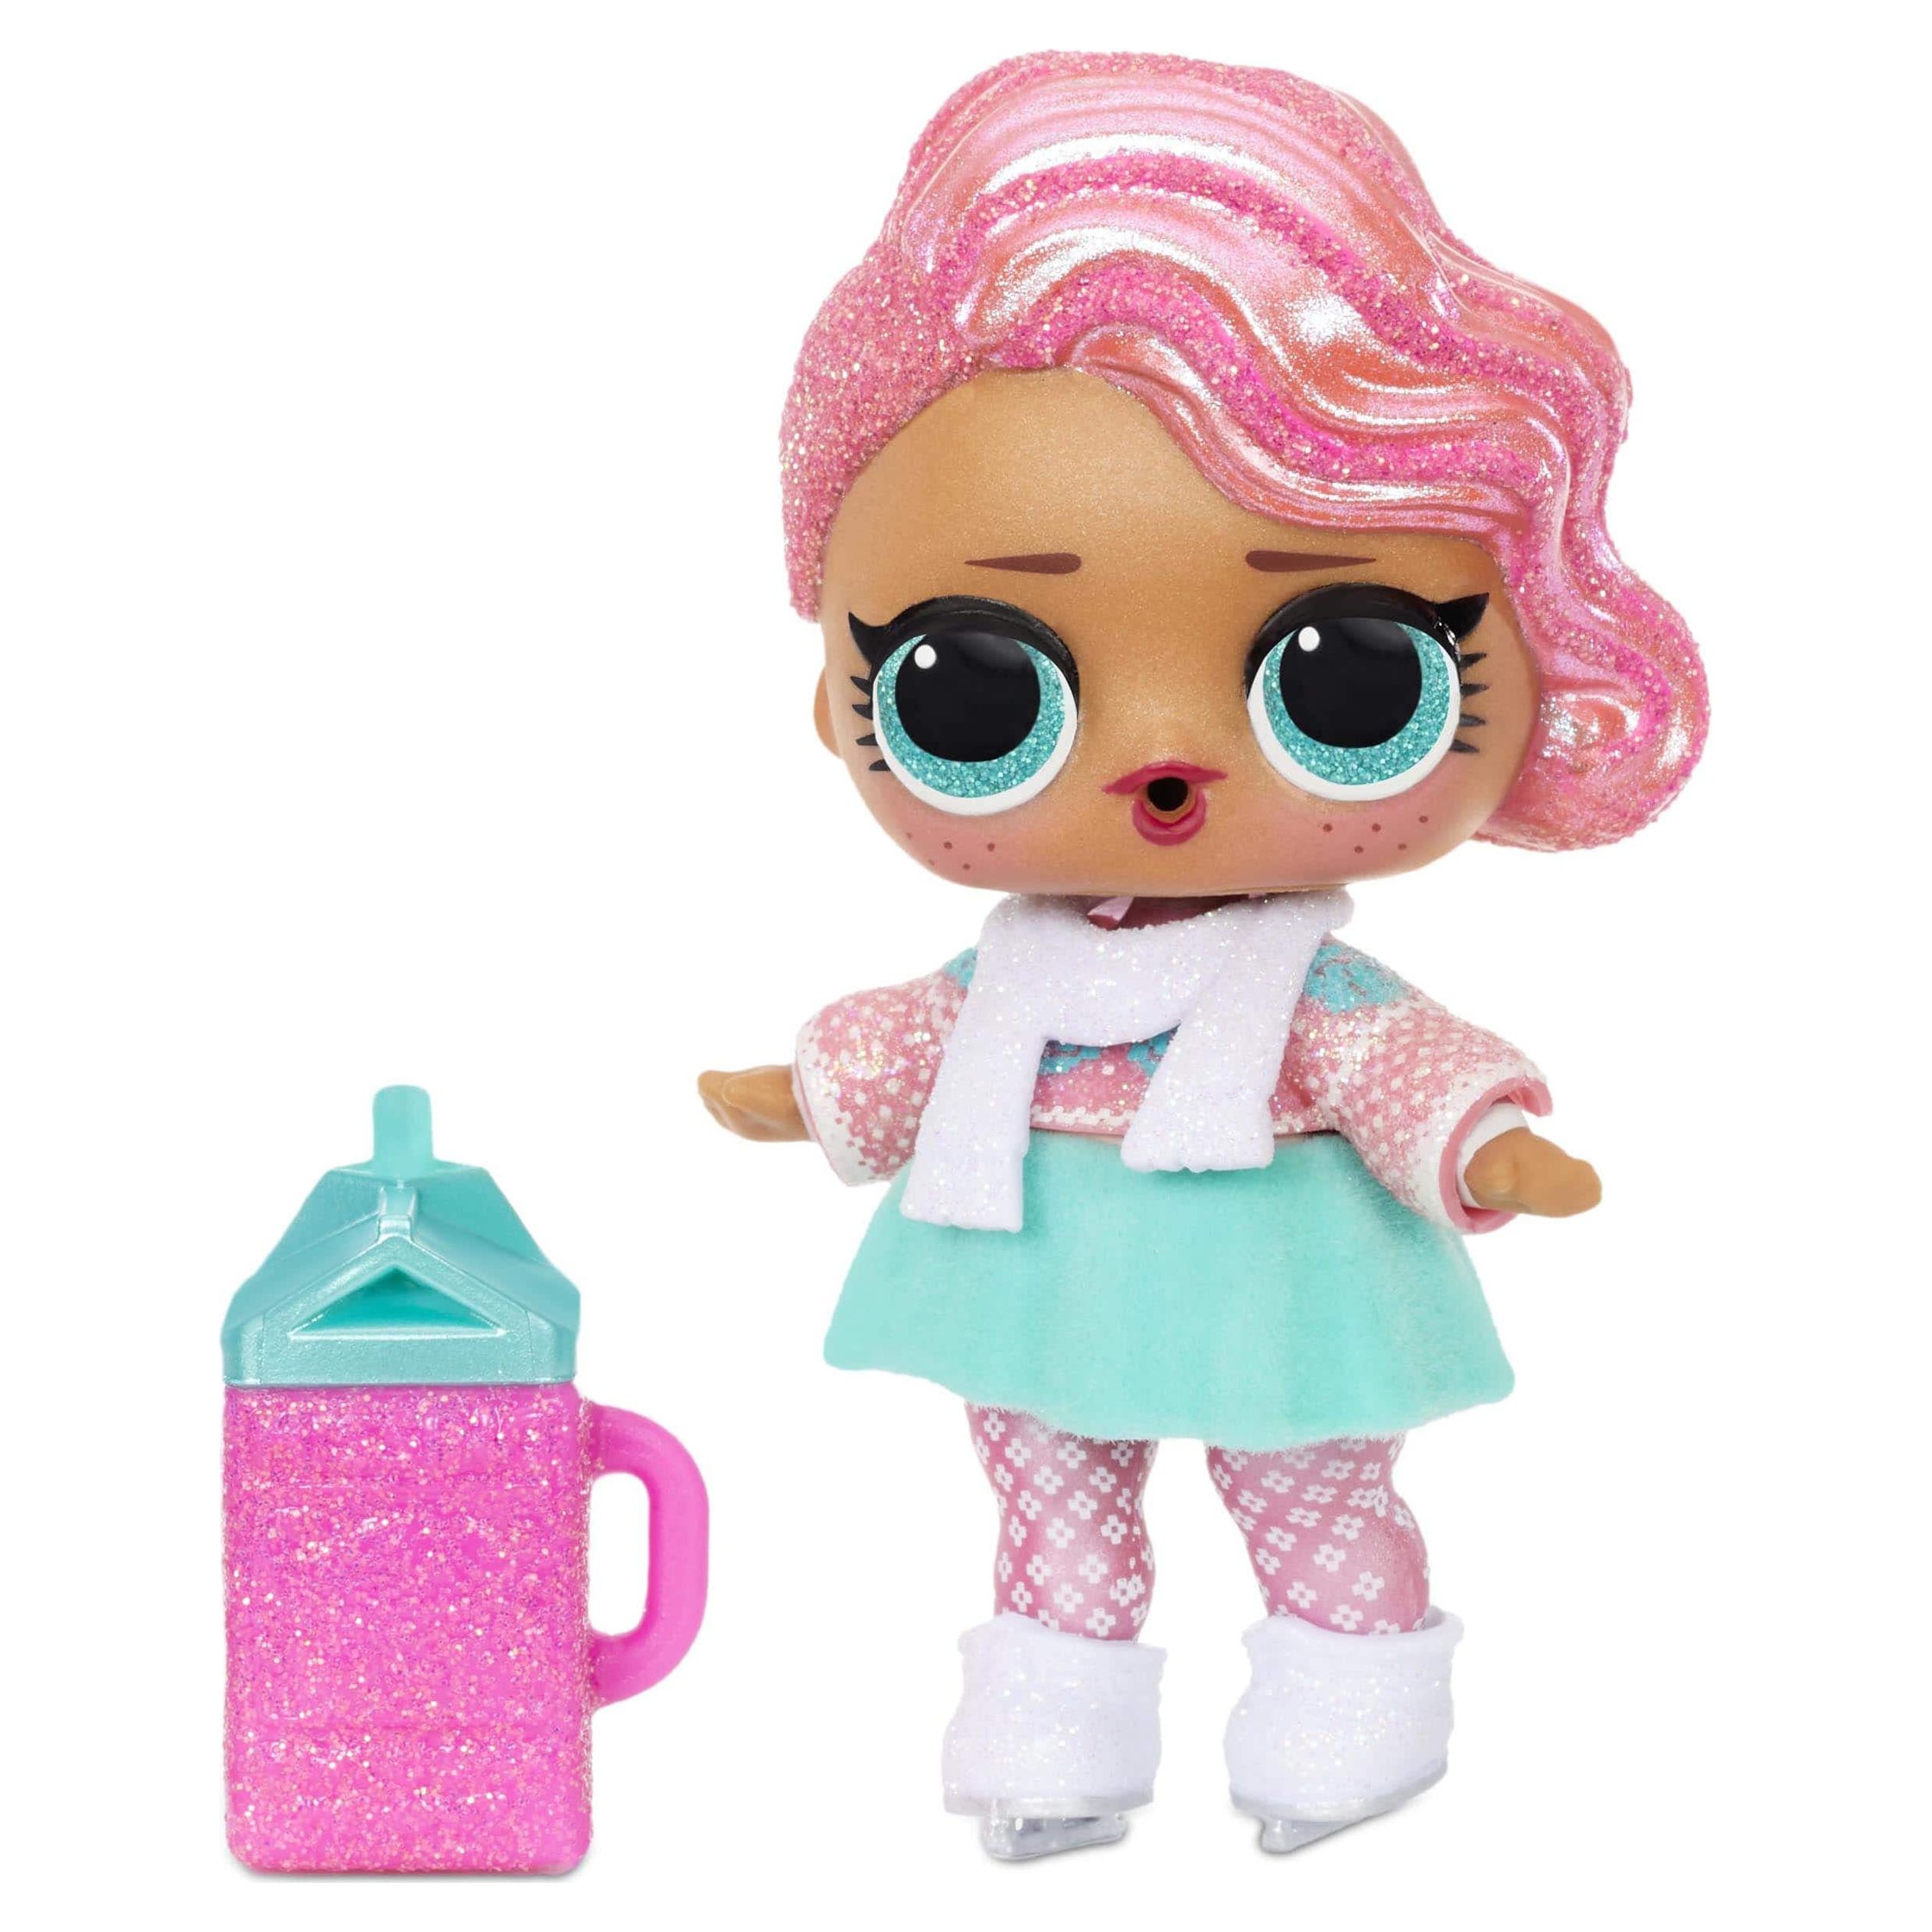 LOL Surprise Winter Chill Dolls With 8 Surprises Including Collectible Doll, Fashions, Doll Accessories, Holiday Ornament Reusable Packaging – Great Gift for Girls Ages 4+ - image 1 of 10